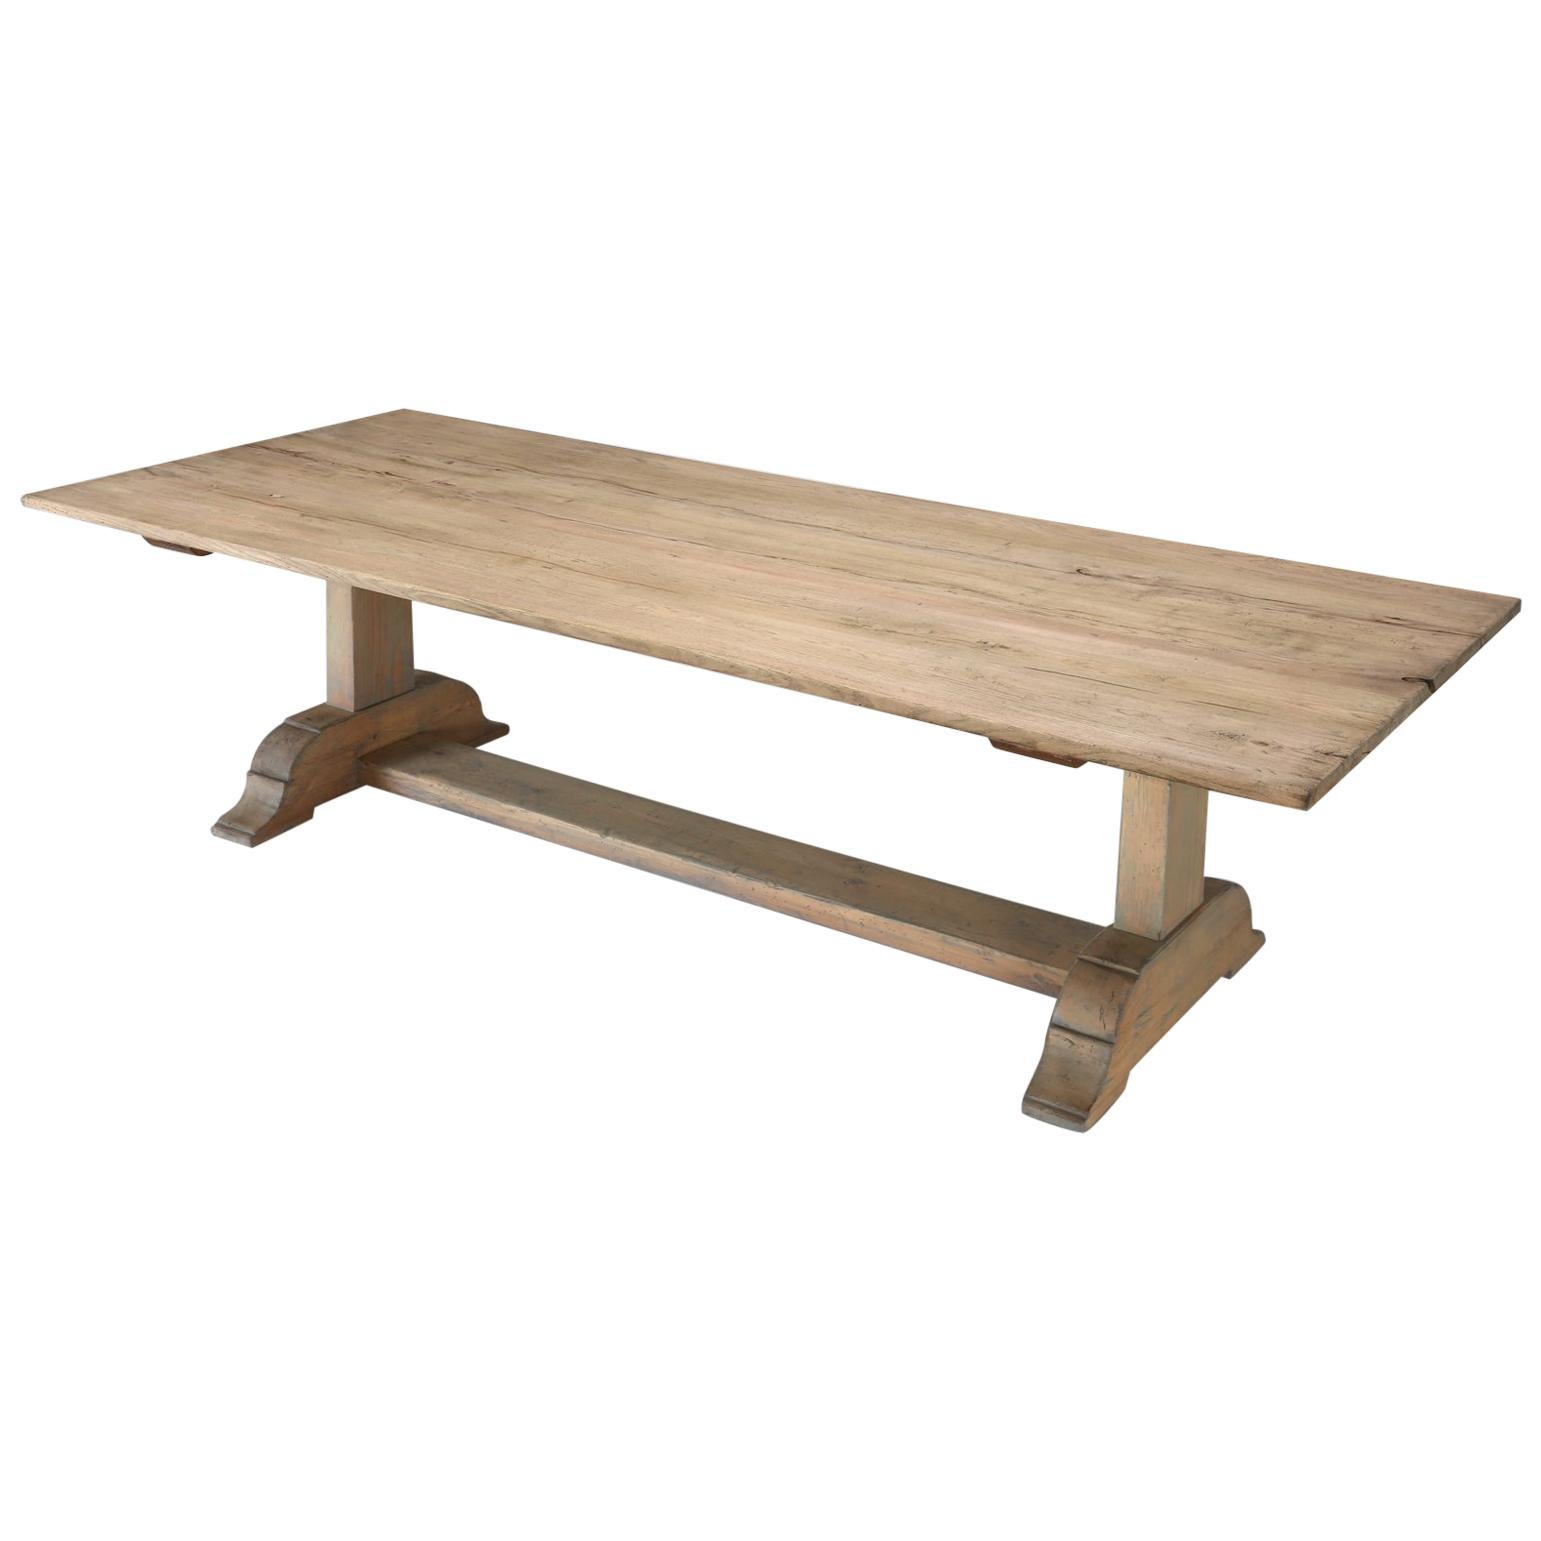 Italian Style Reclaimed White Oak Trestle Dining Table Available Any Dimension